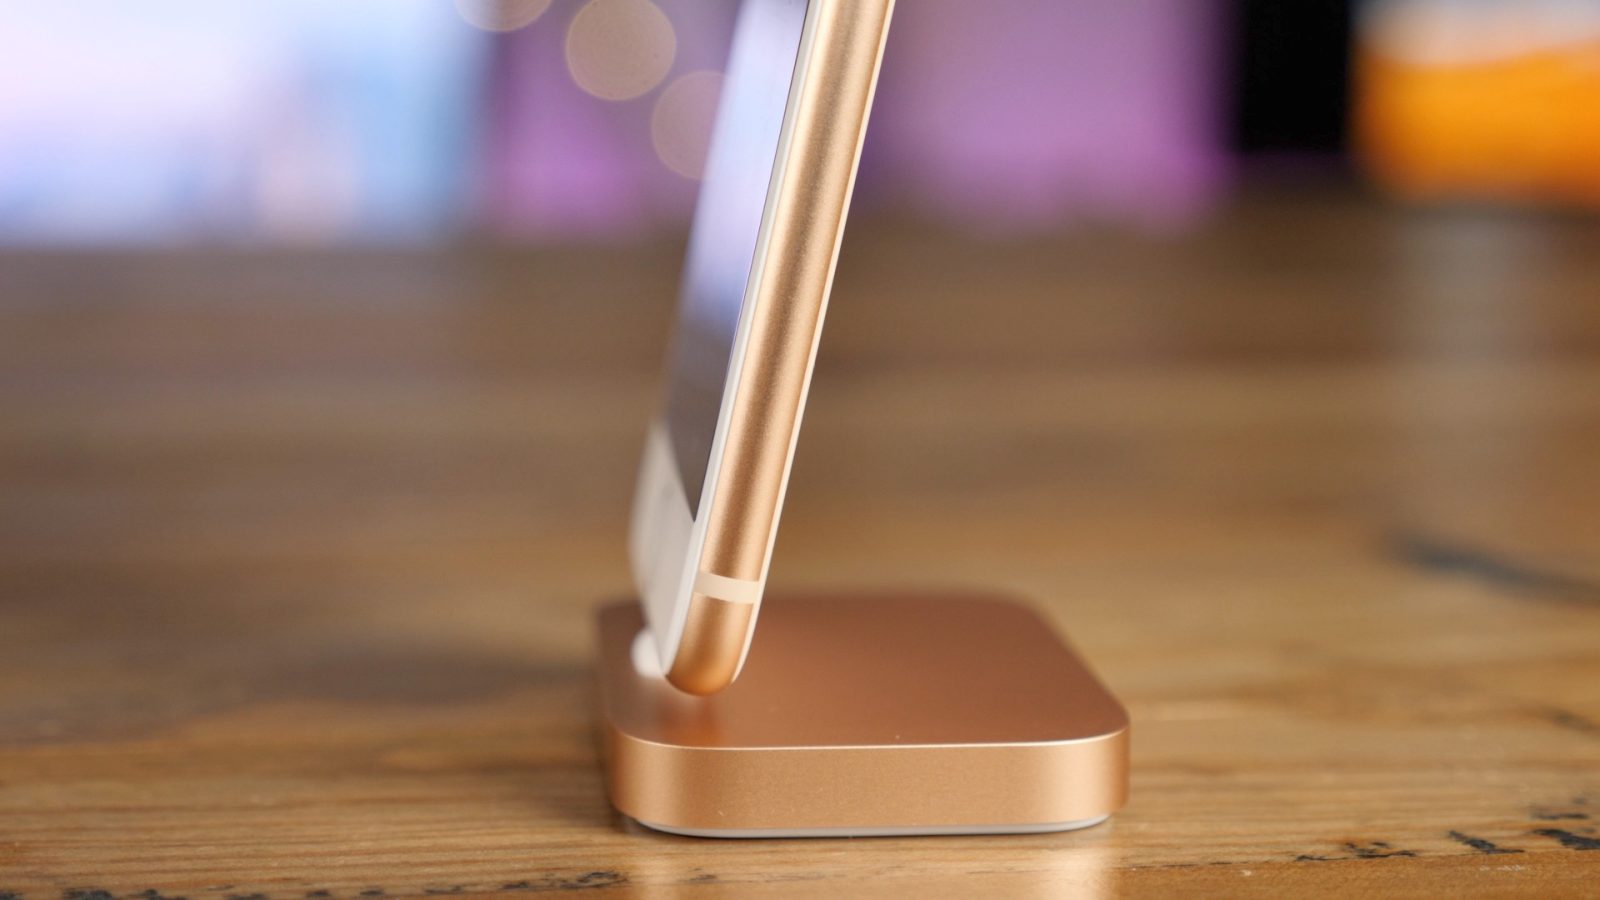 Hands-on: Apple's newest Lightning Dock looks great with the Gold iPhone 8  [Video] - 9to5Mac